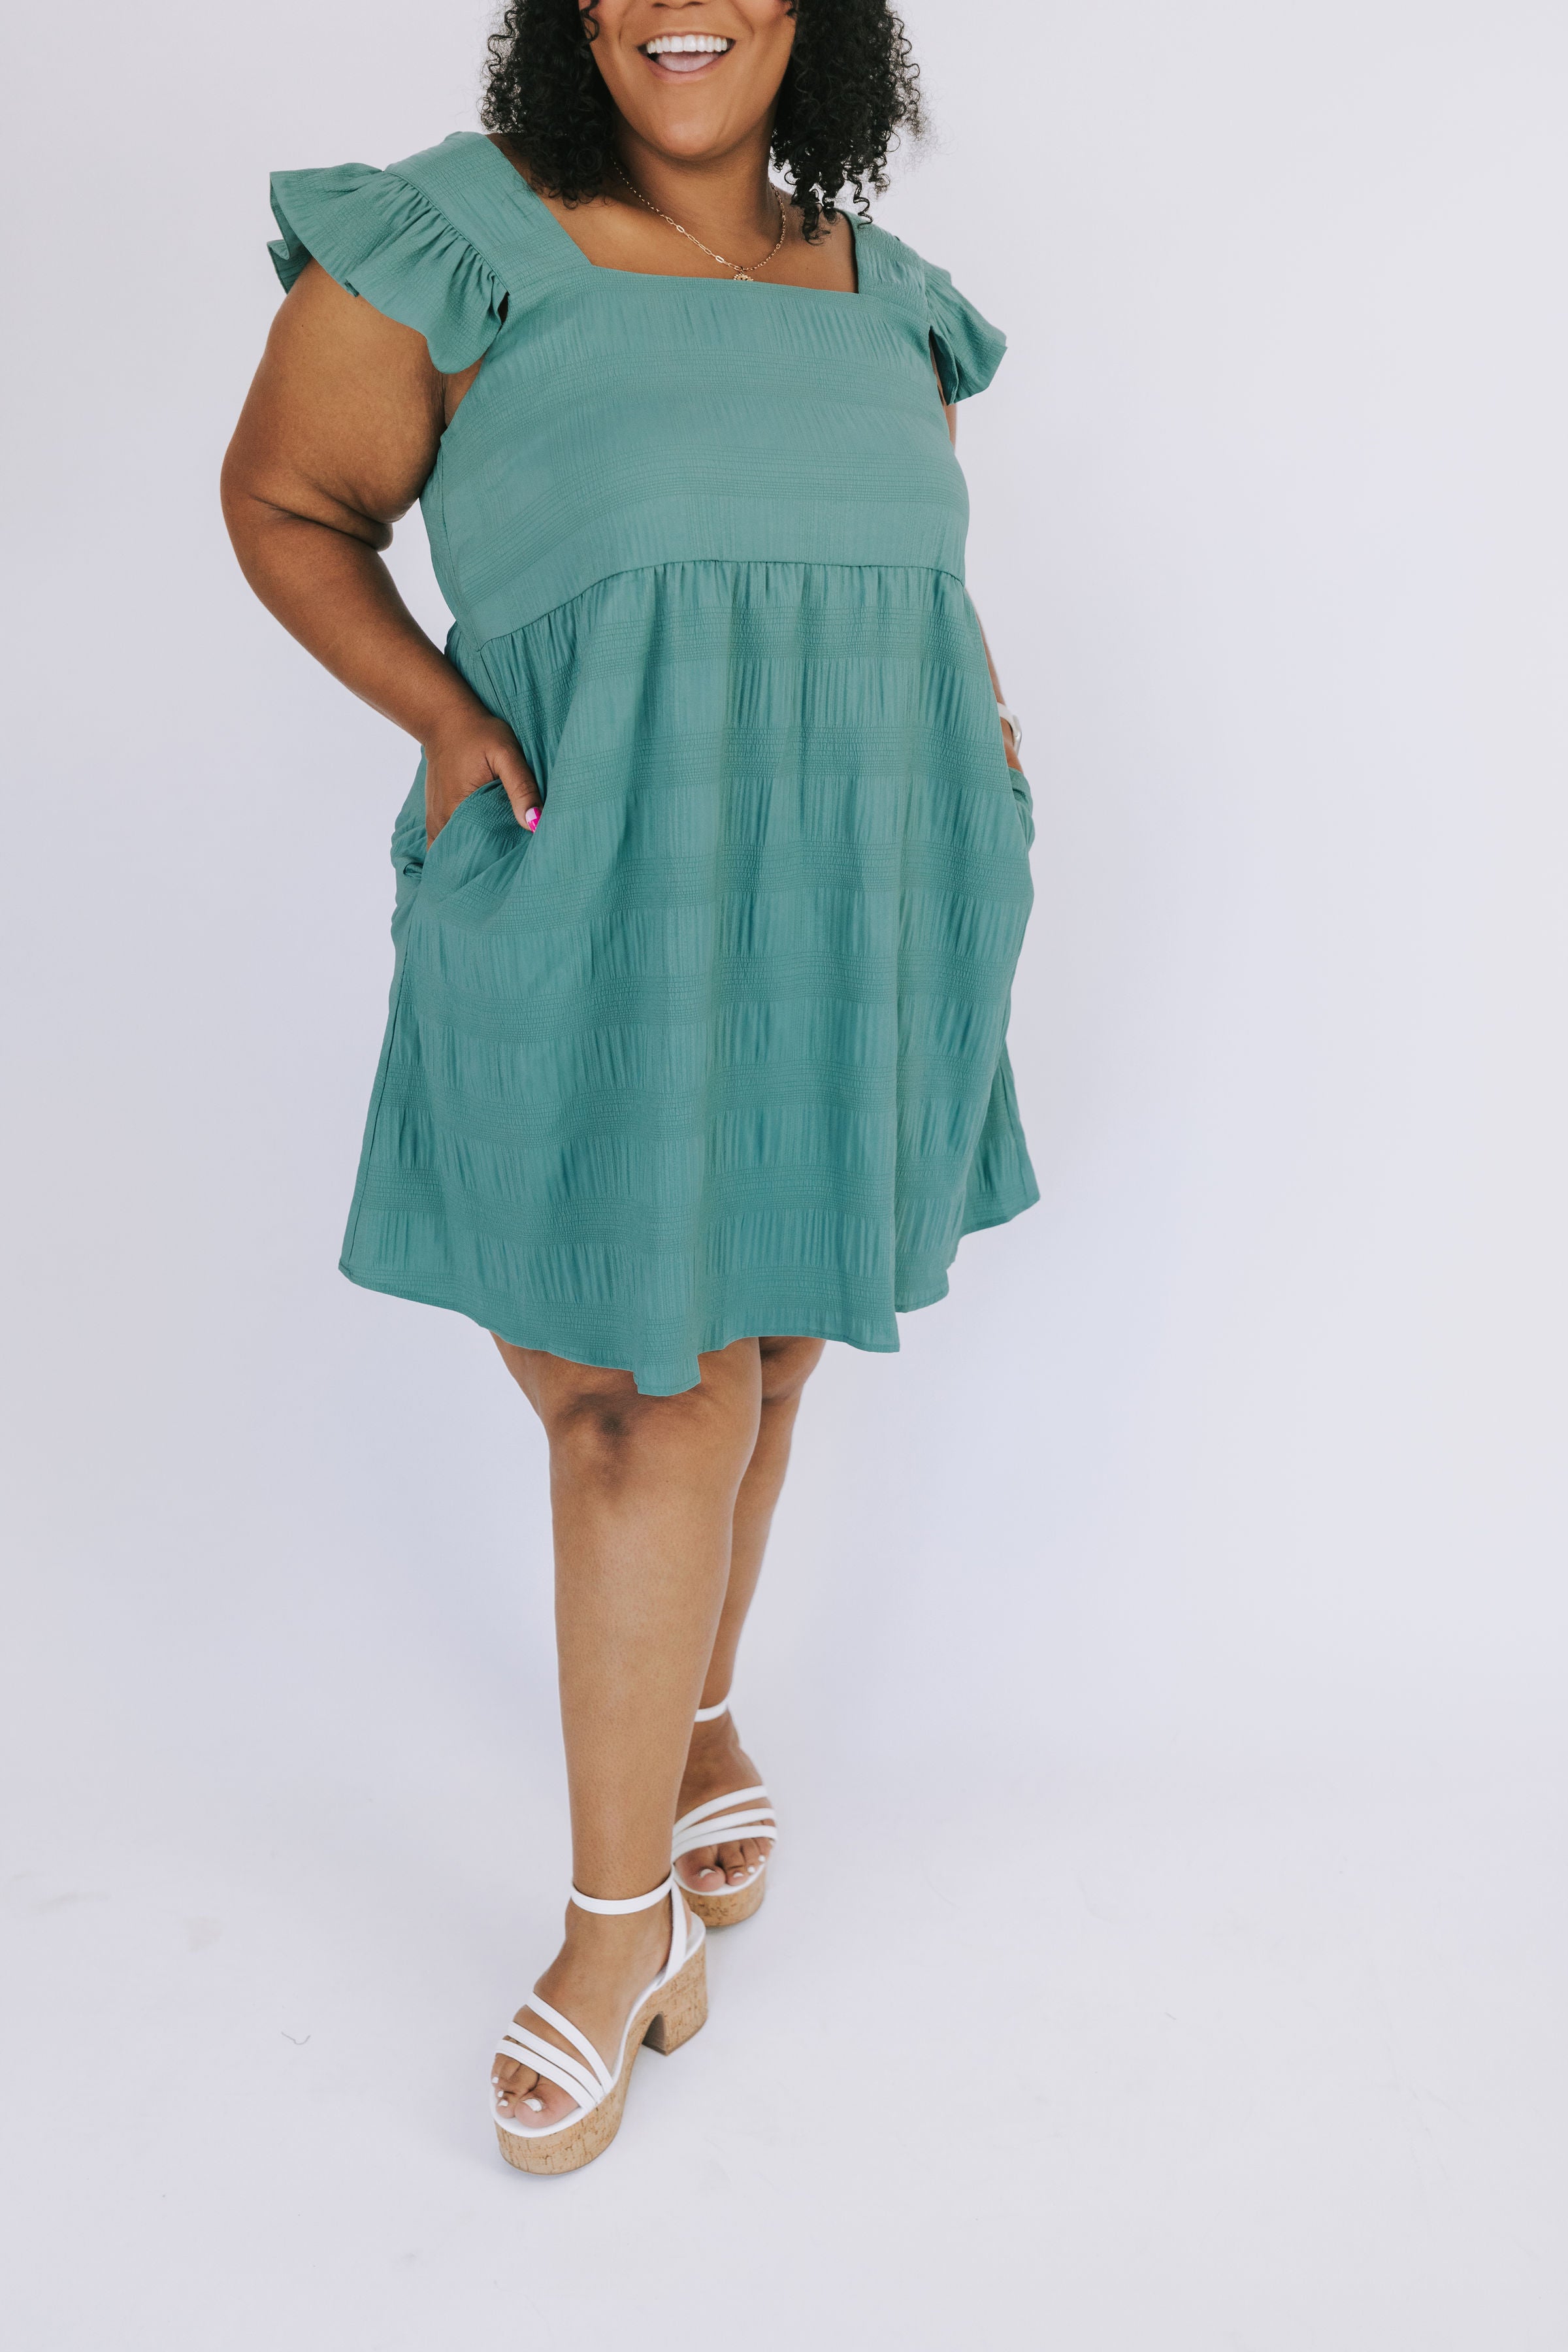 PLUS SIZE - Halfway There Dress